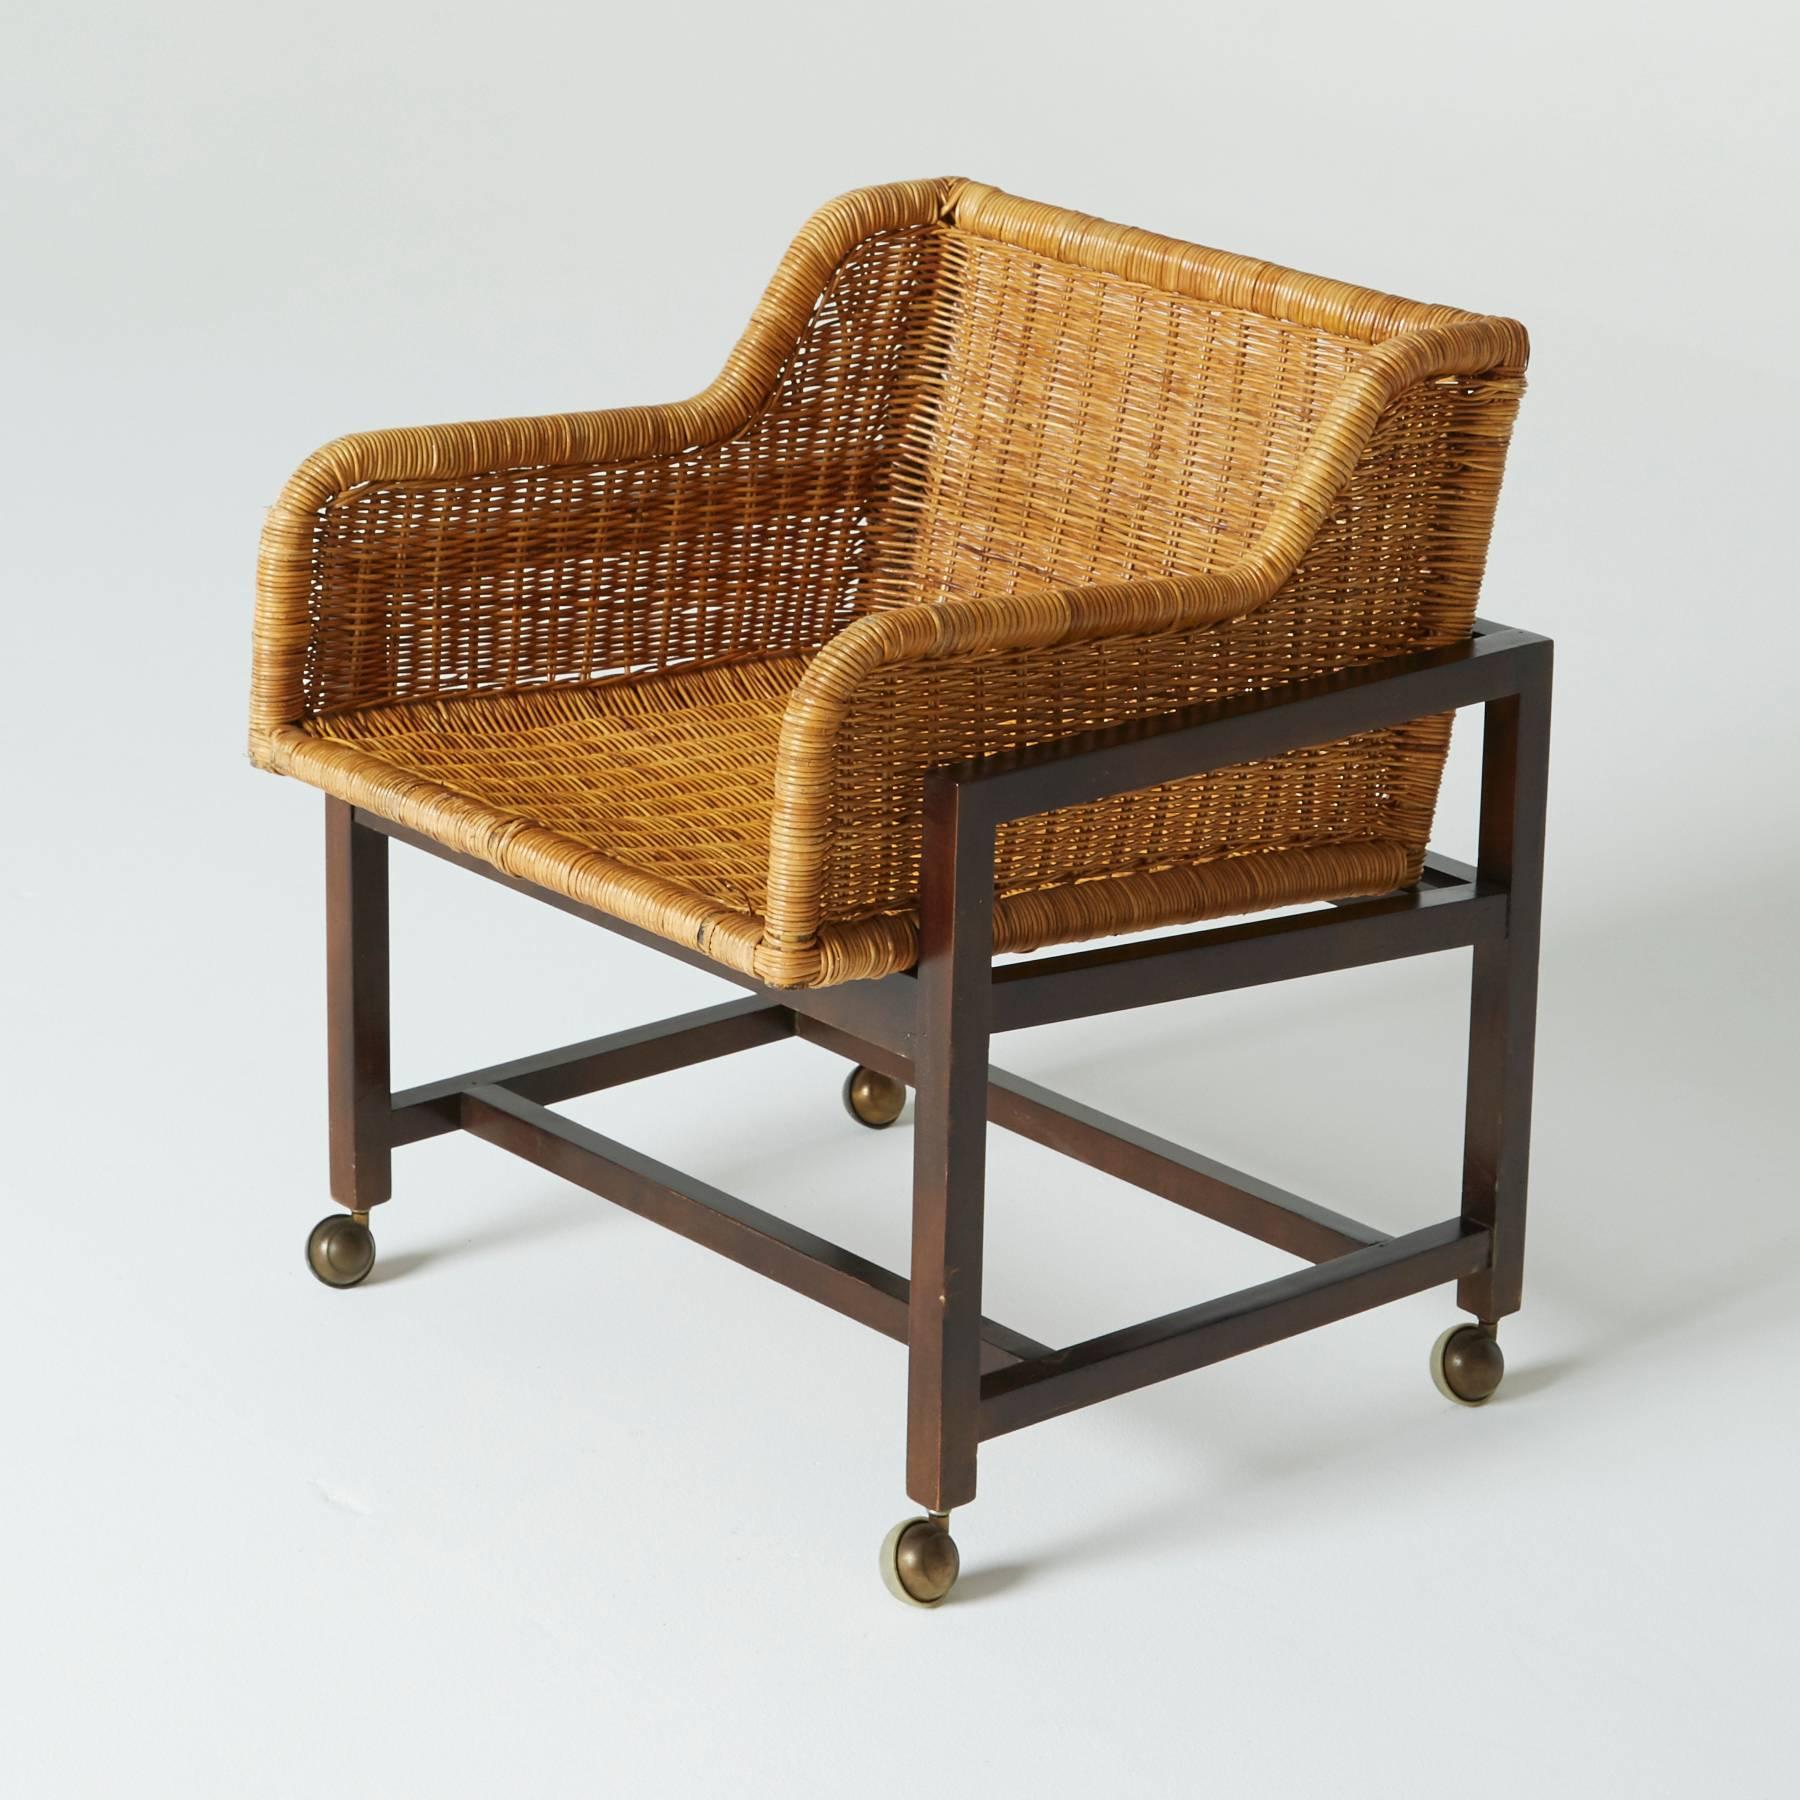 20th Century Set of Three Woven Wicker Basket Chairs